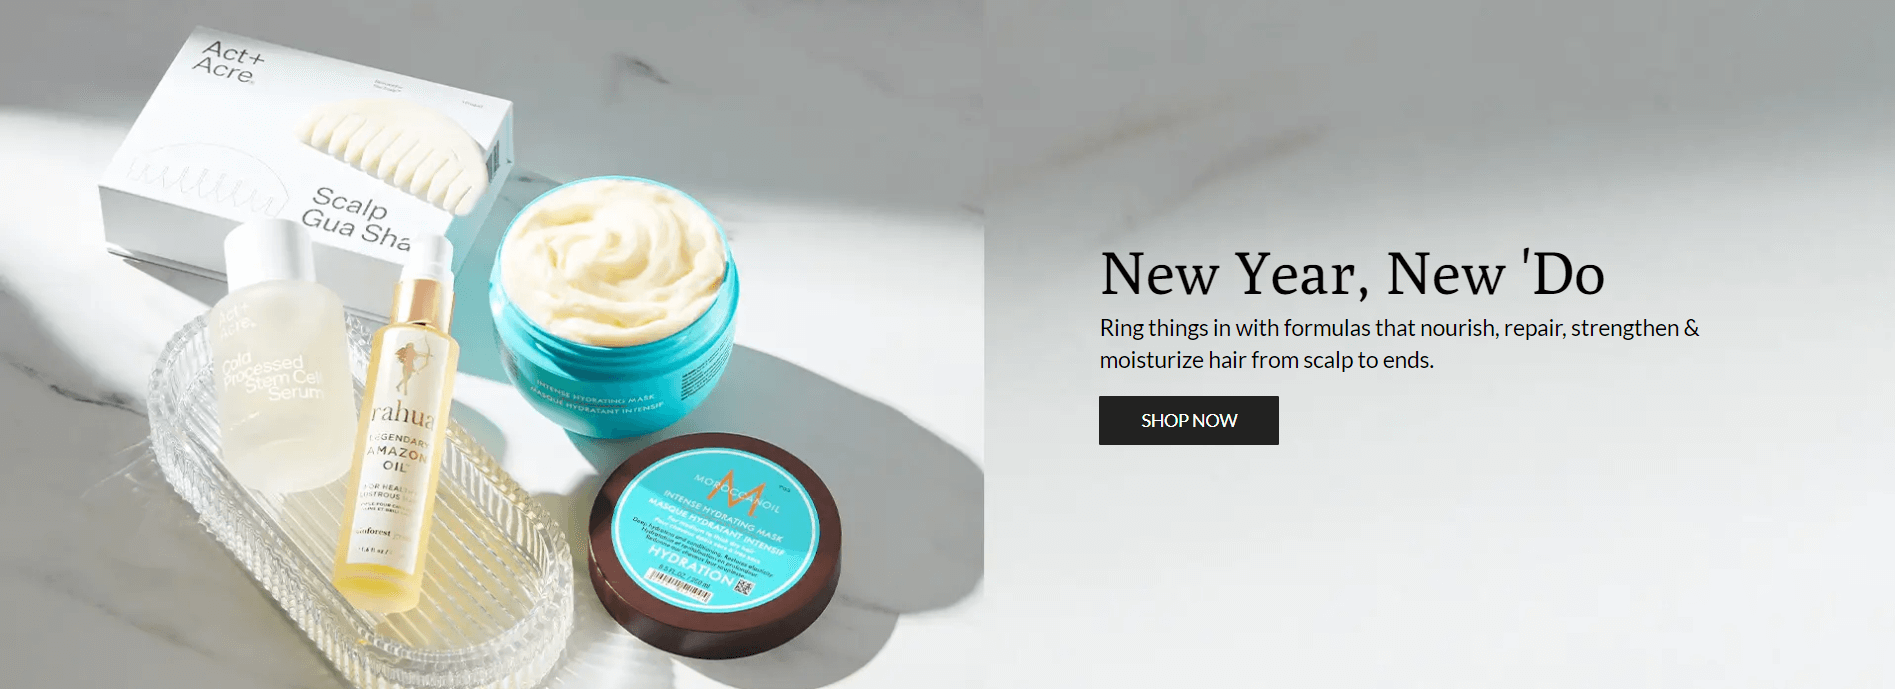 Dermstore New Year Products